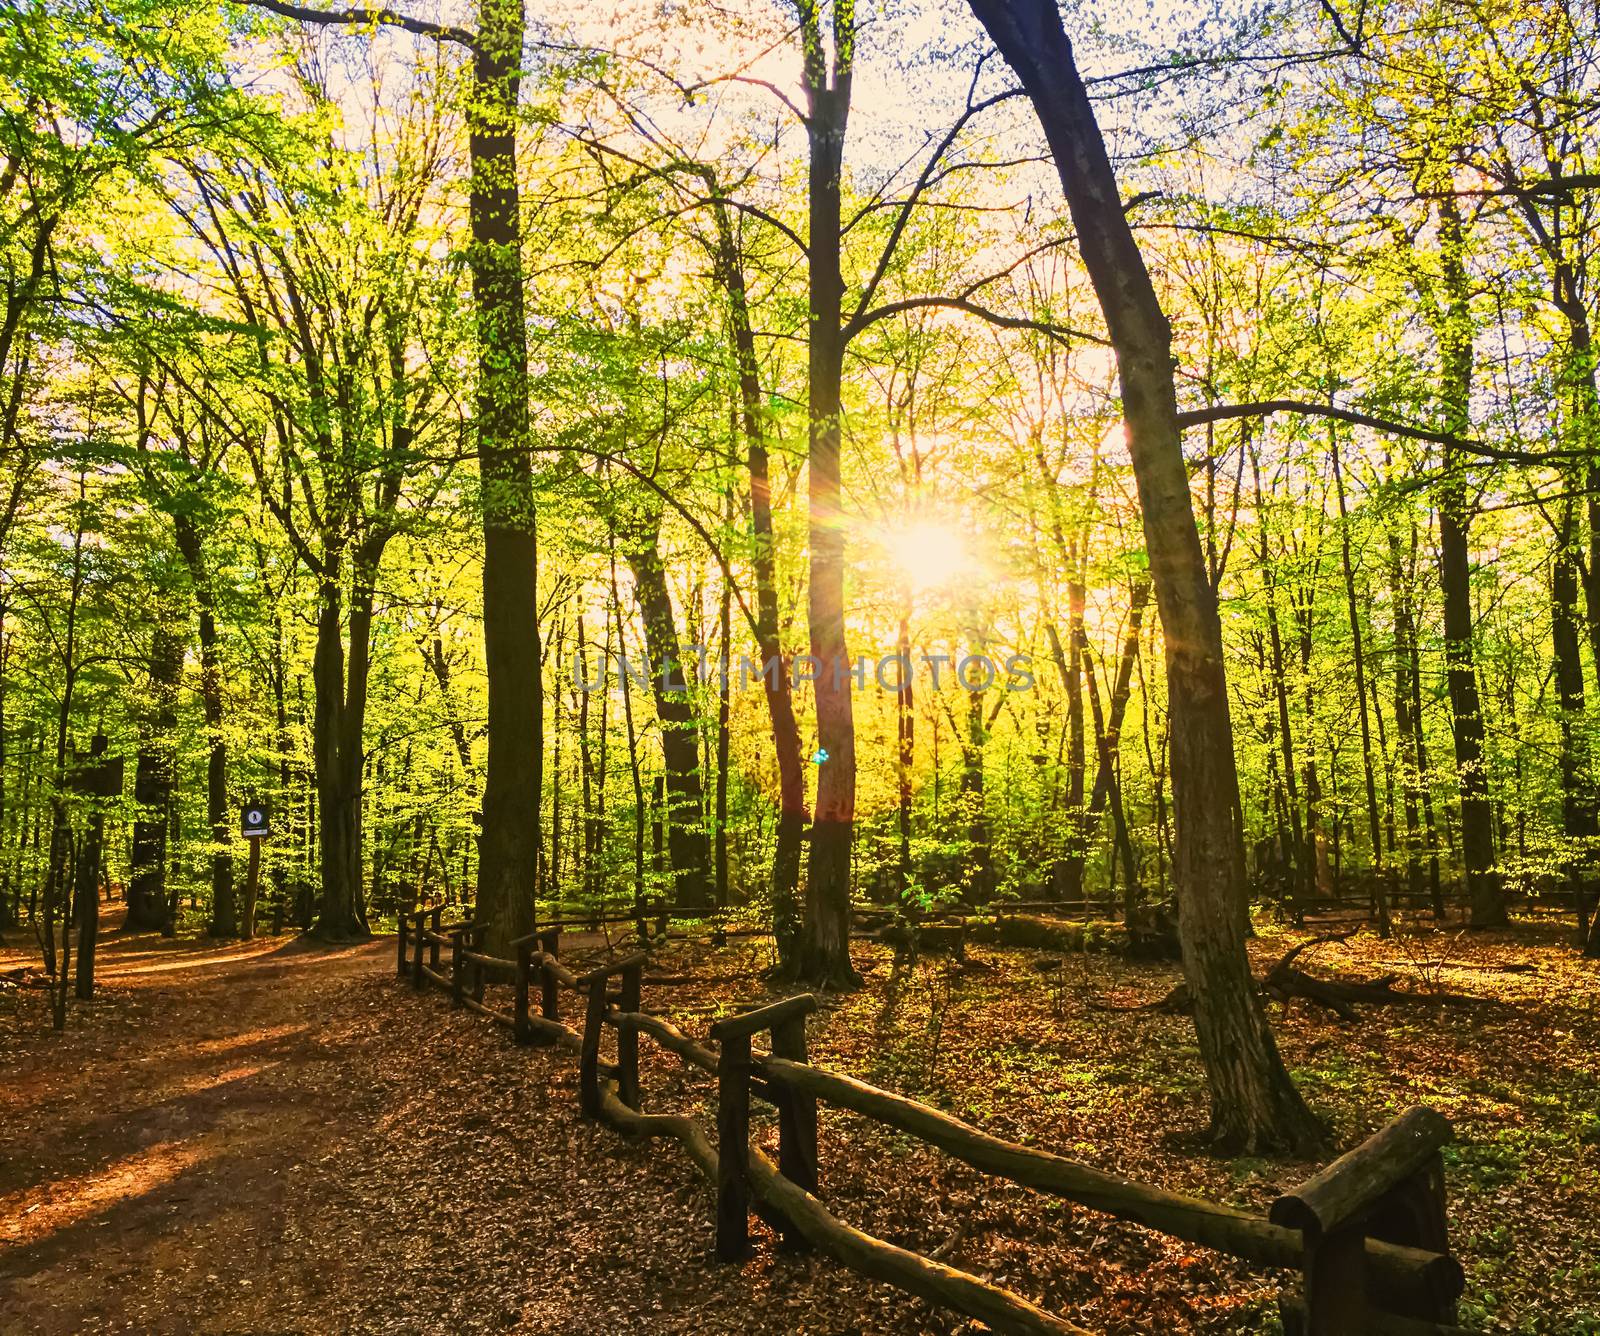 Spring forest landscape at sunset or sunrise, nature and environment